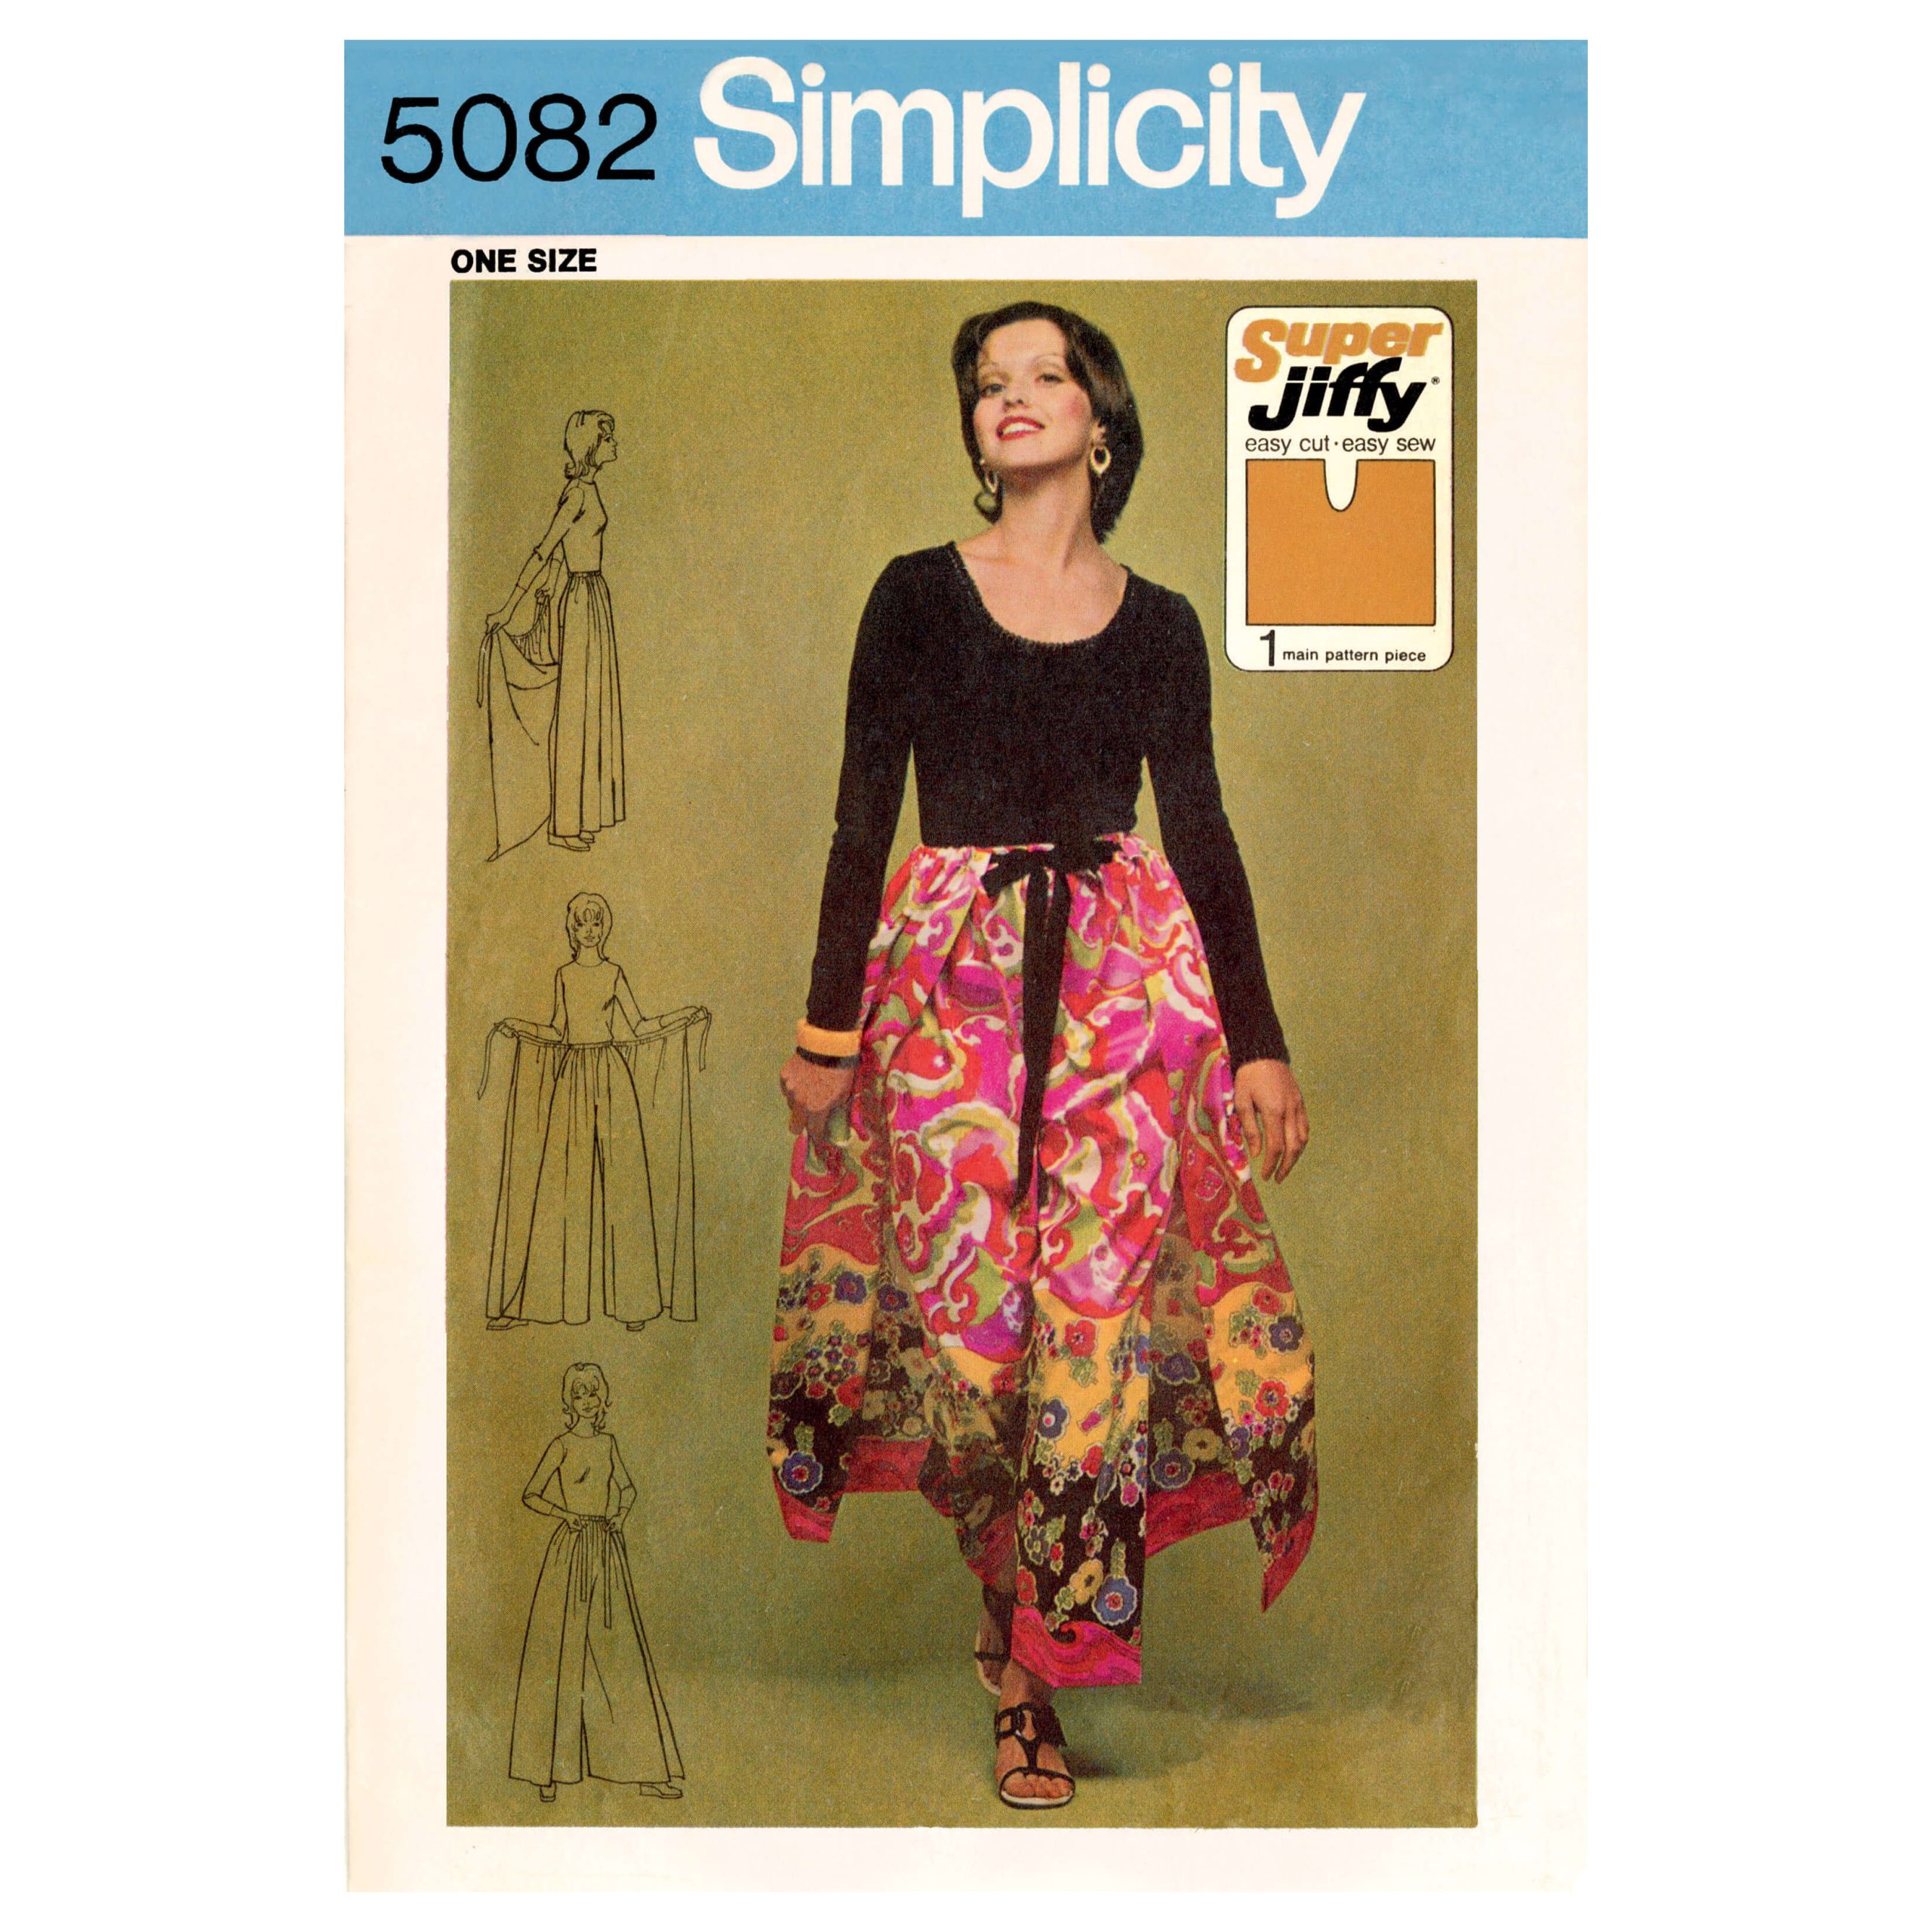 Simplicity Sewing Pattern S9595 Misses' Super Jiffy Wrap and Tie Trouserskirt